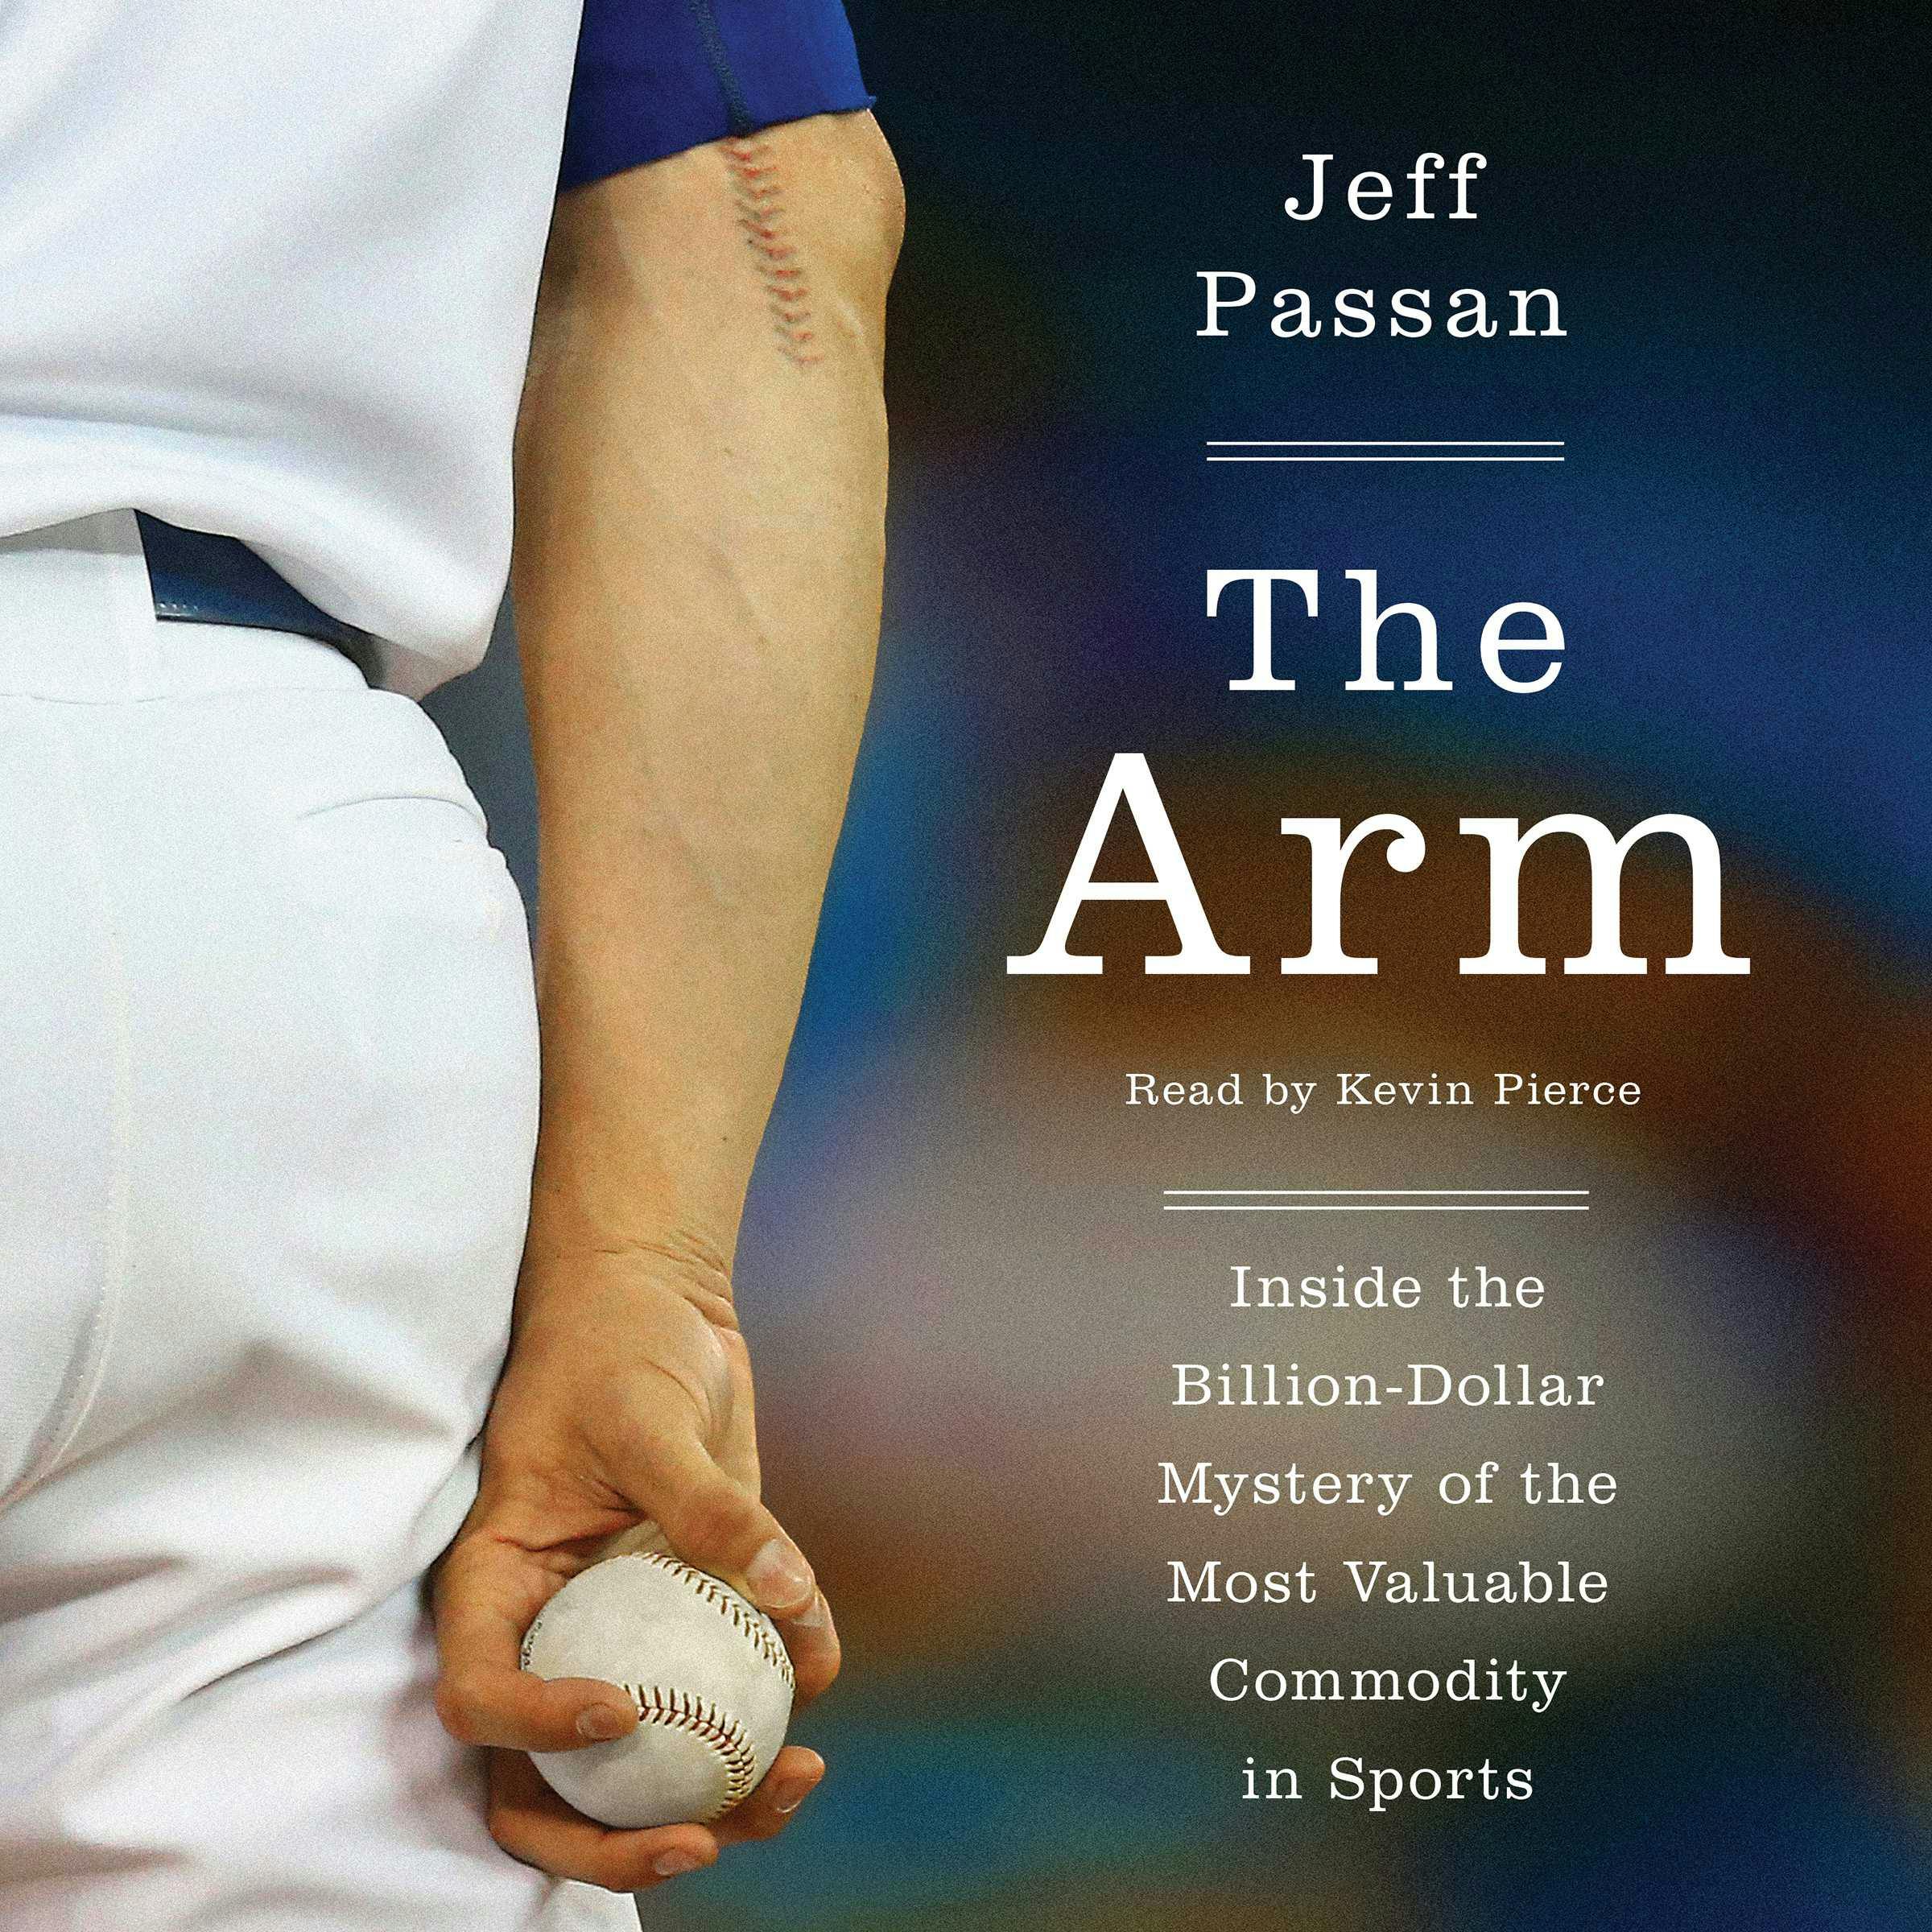 The Arm: Inside the Billion-Dollar Mystery of the Most Valuable Commodity in Sports - Jeff Passan